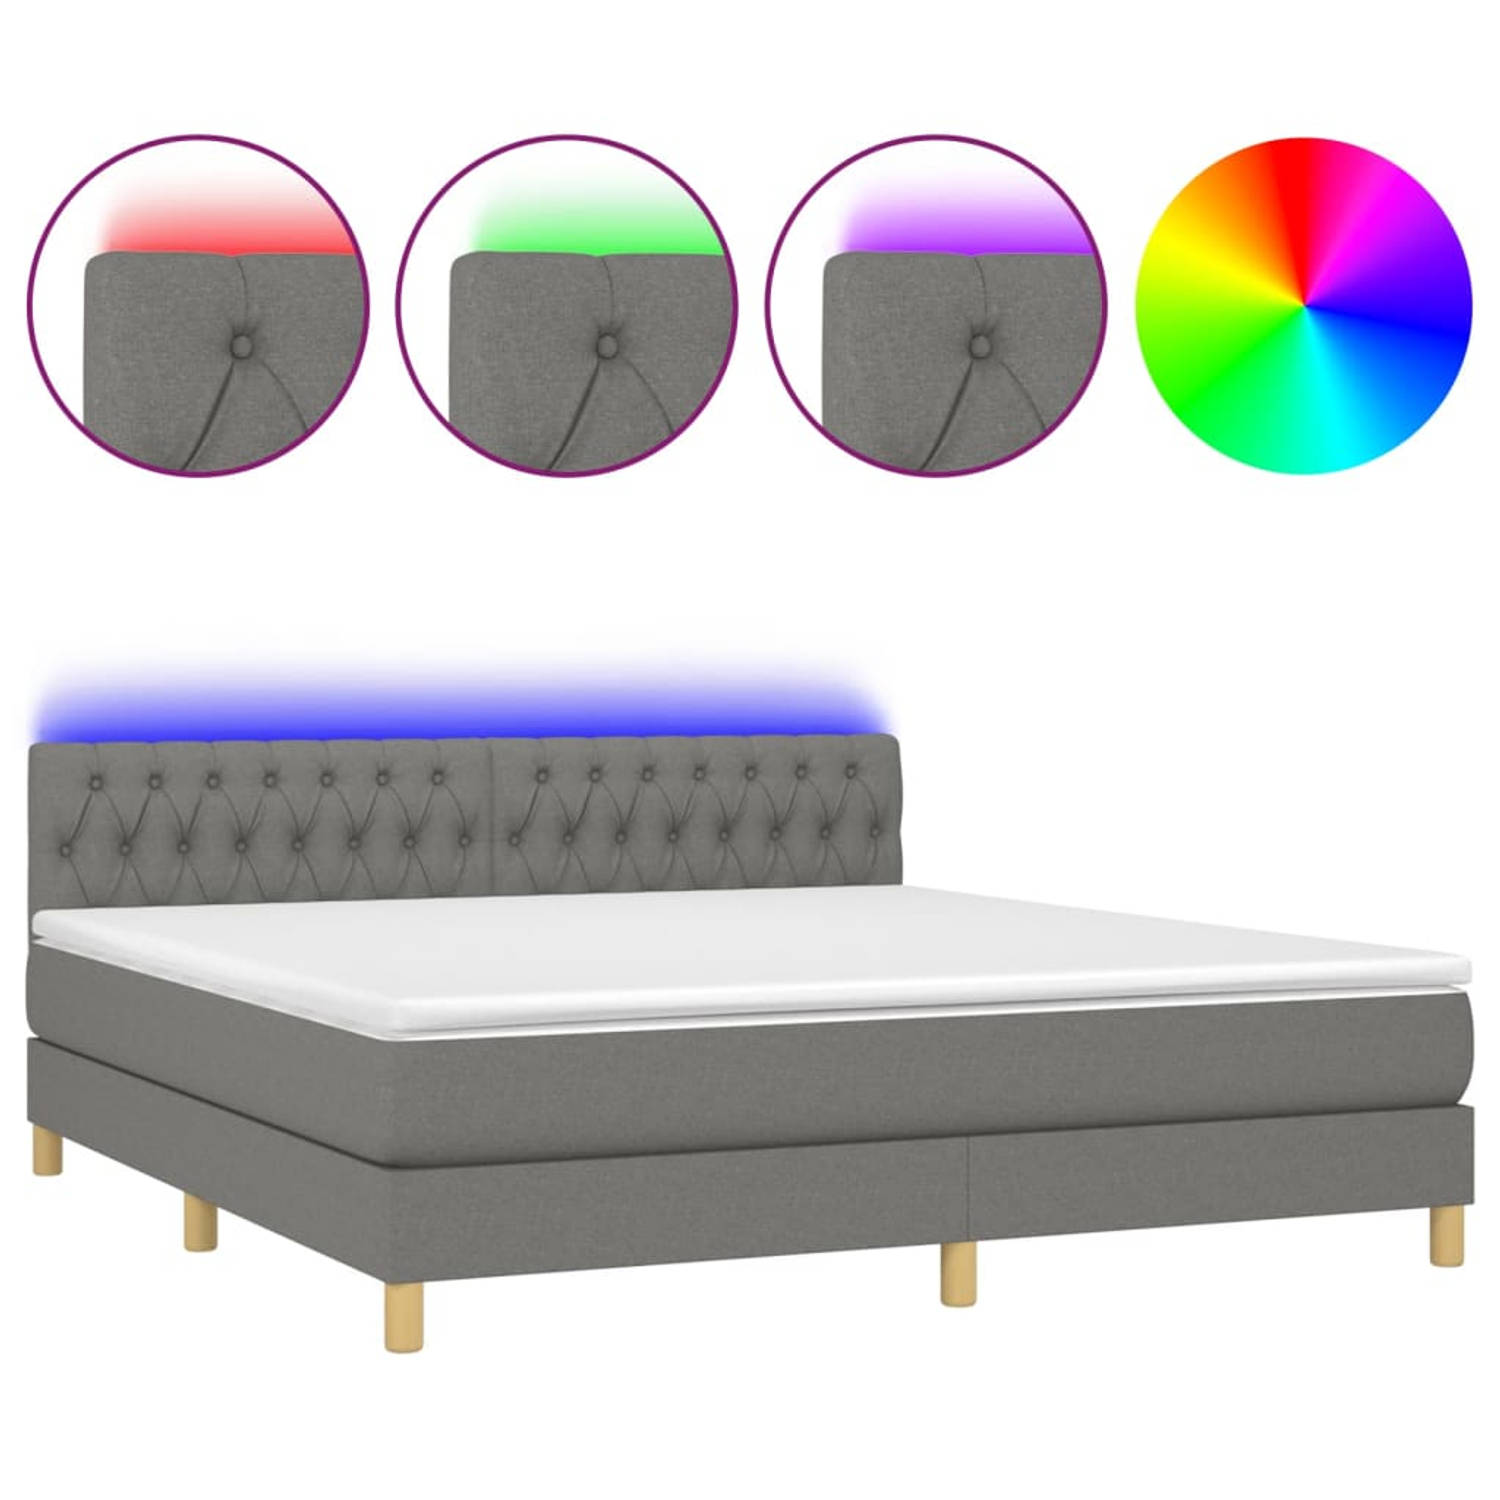 The Living Store Boxspring met matras en LED stof donkergrijs 160x200 cm - Boxspring - Boxsprings - Bed - Slaapmeubel - Boxspringbed - Boxspring Bed - Tweepersoonsbed - Bed Met Mat